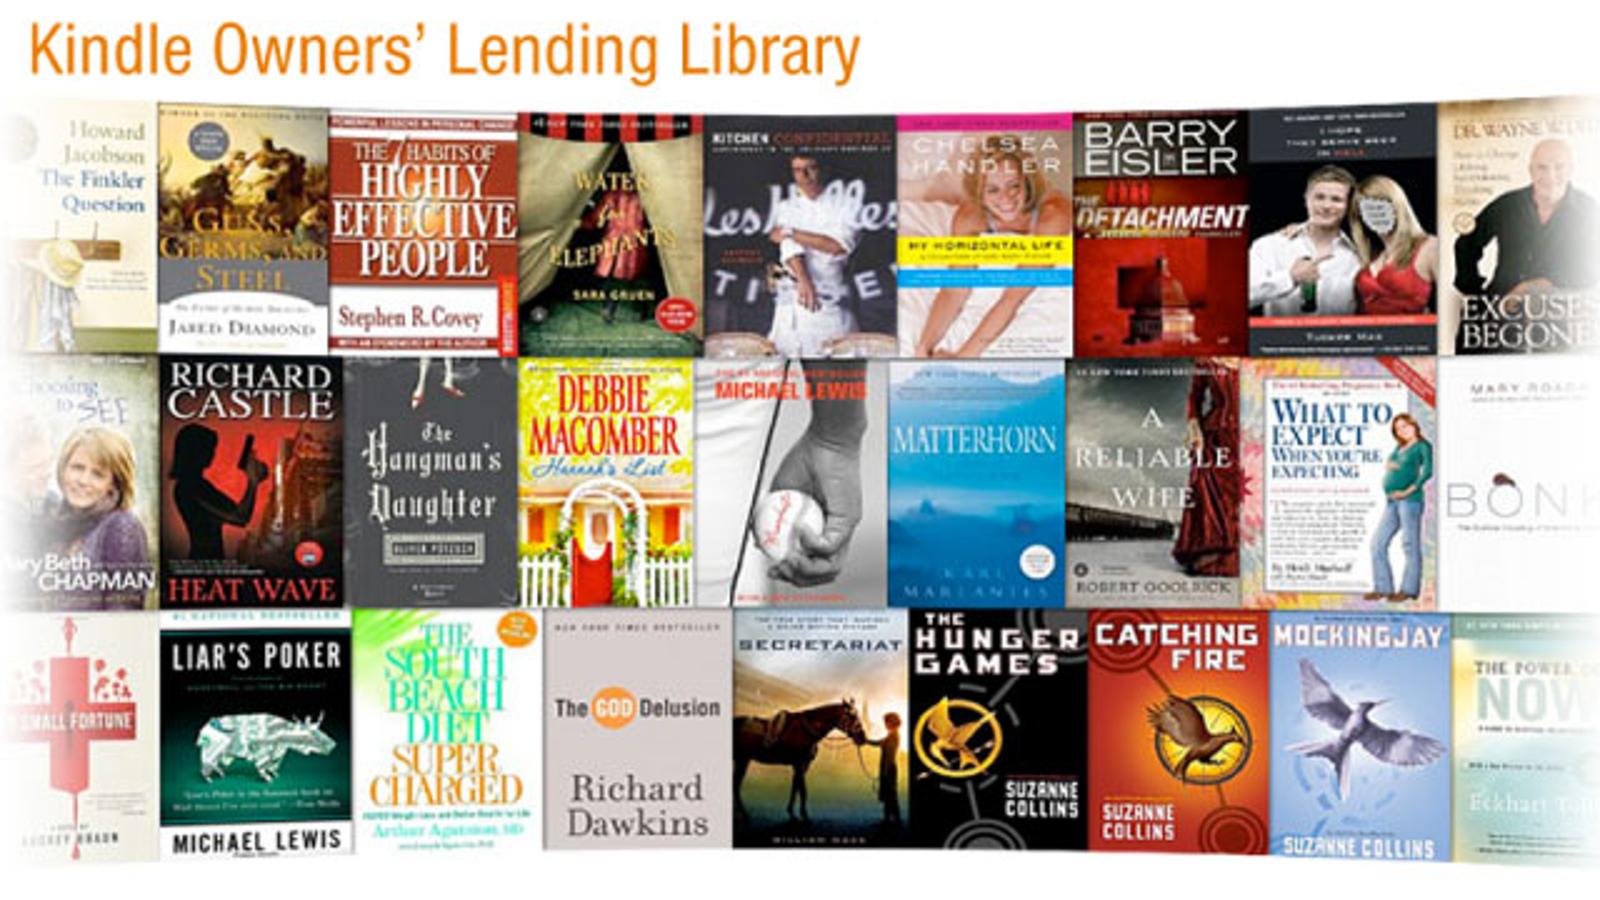 can i download ebooks to kindle from dpla